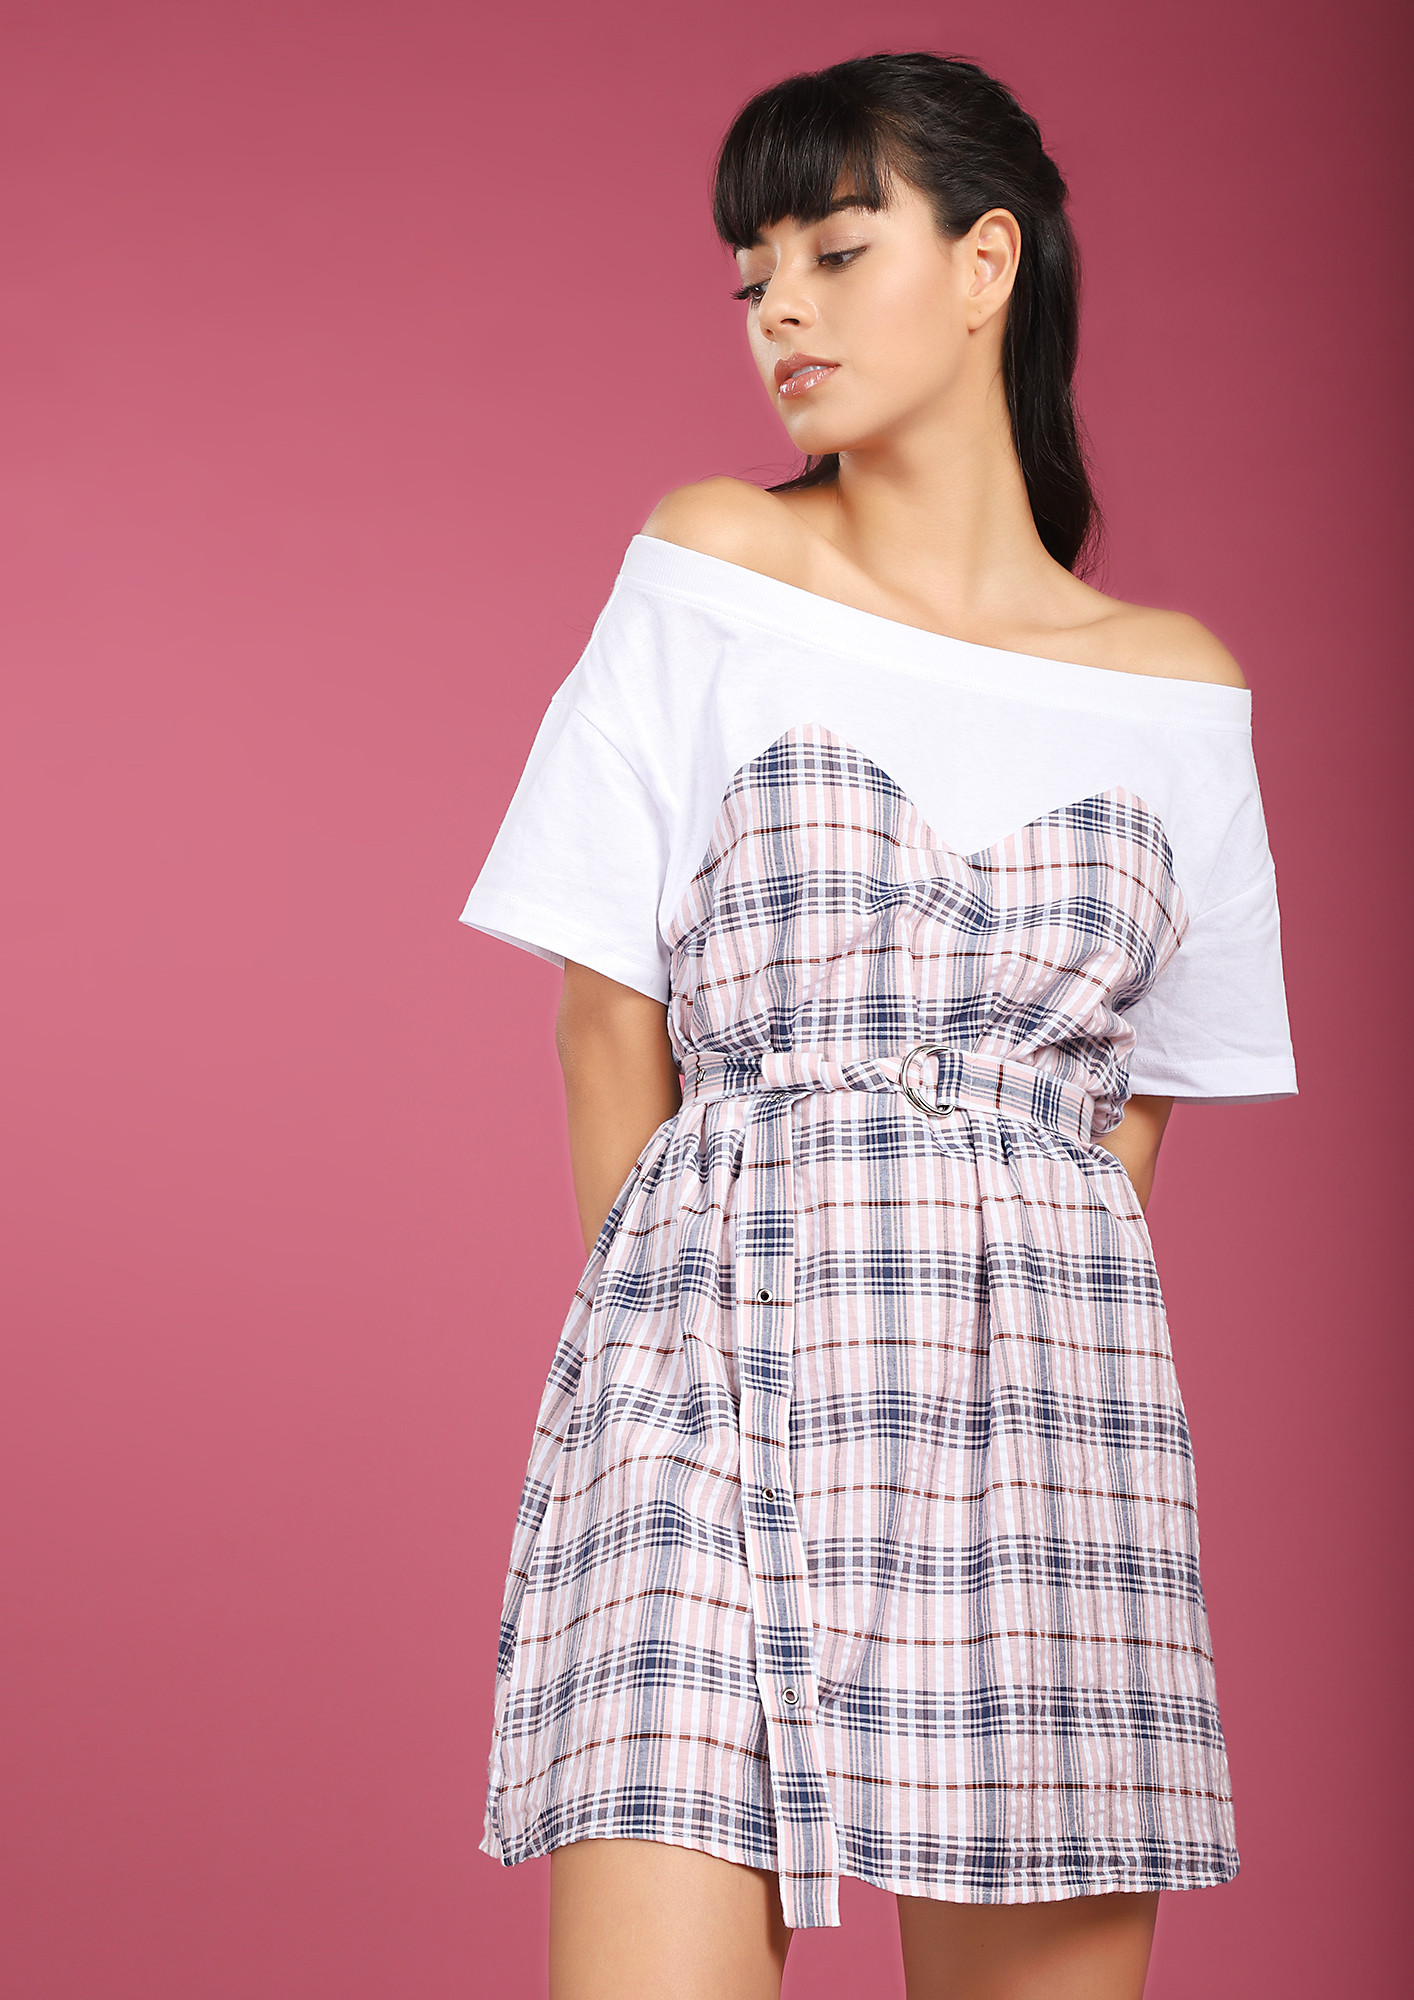 CLASS IN SESSION PINK SKATER DRESS